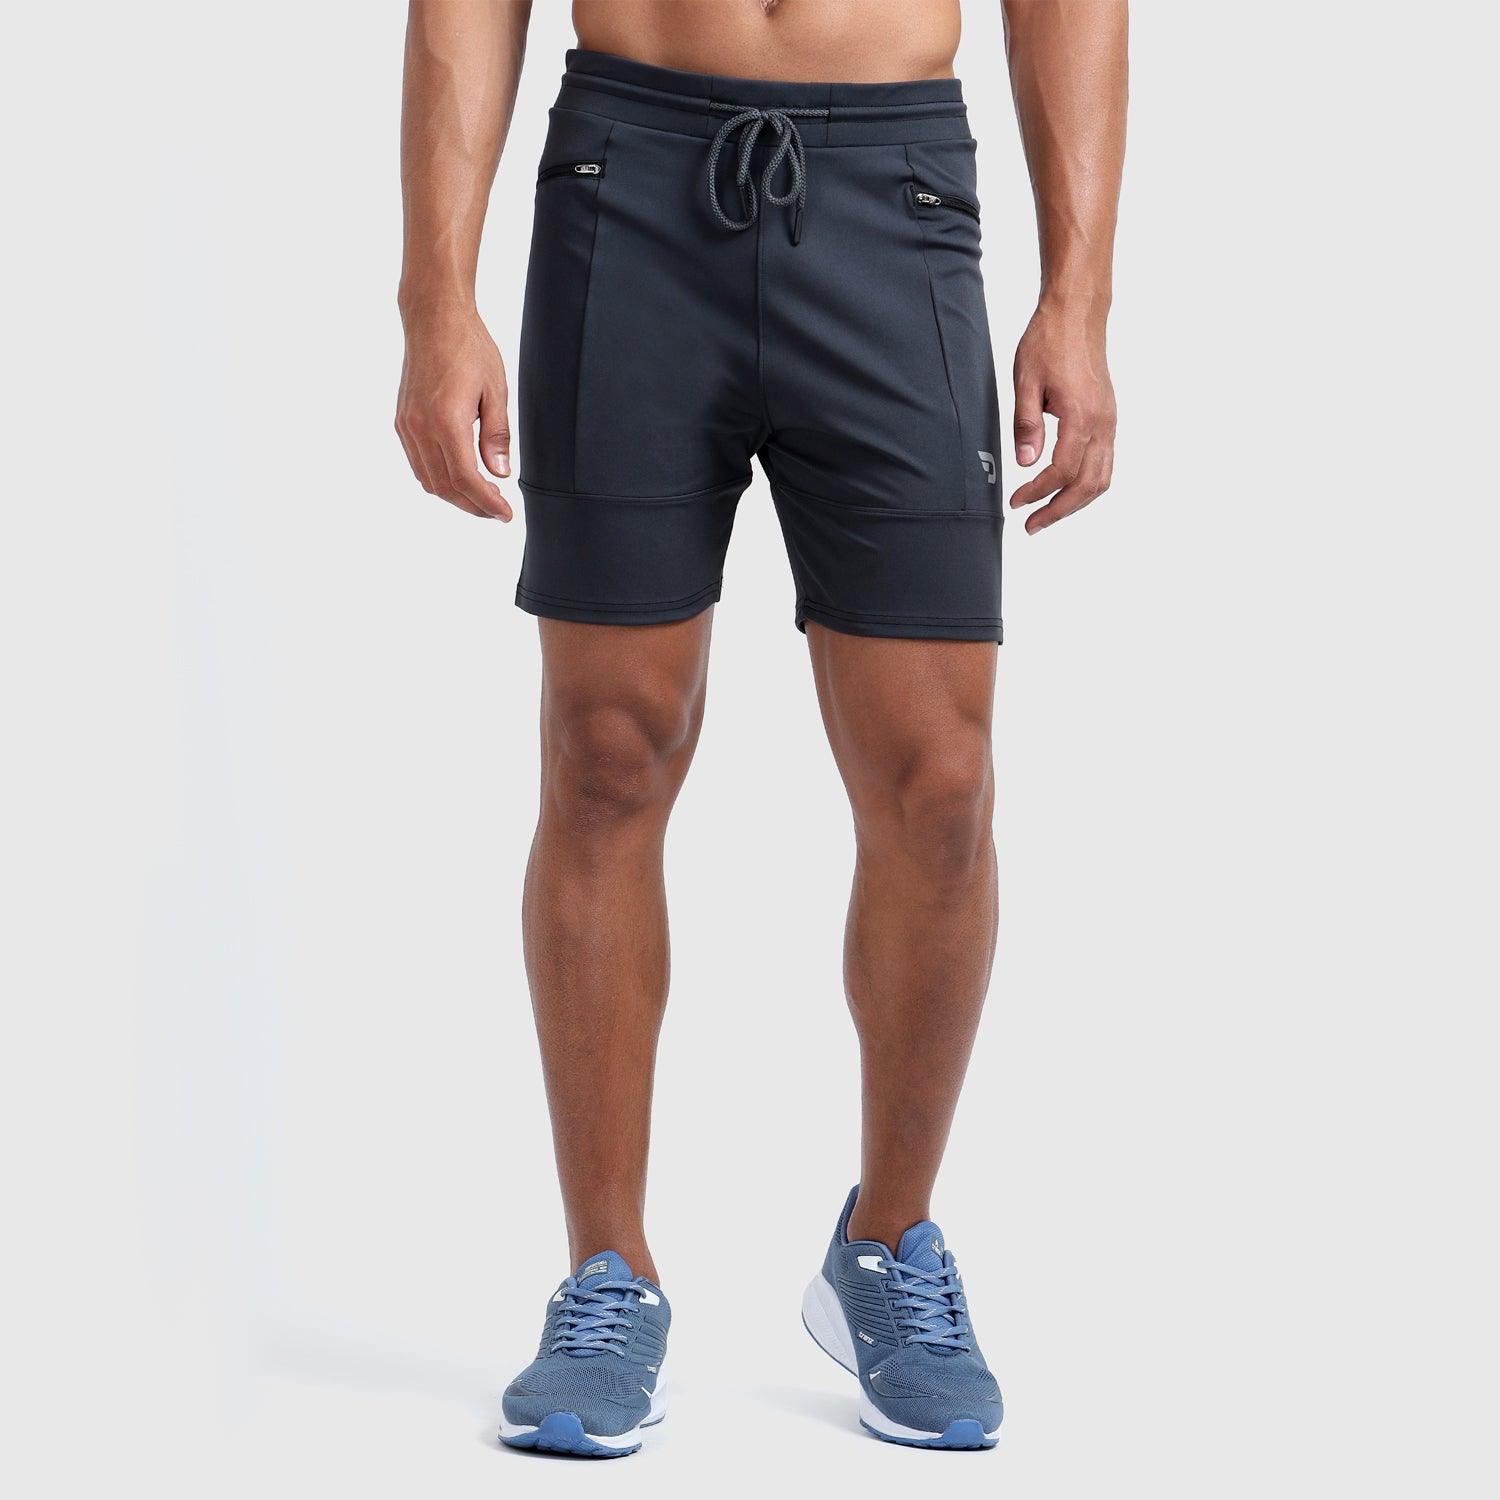 Denmonk's fashionable Power Shorts charcoal shorts for men will boost your level of gym fitness.